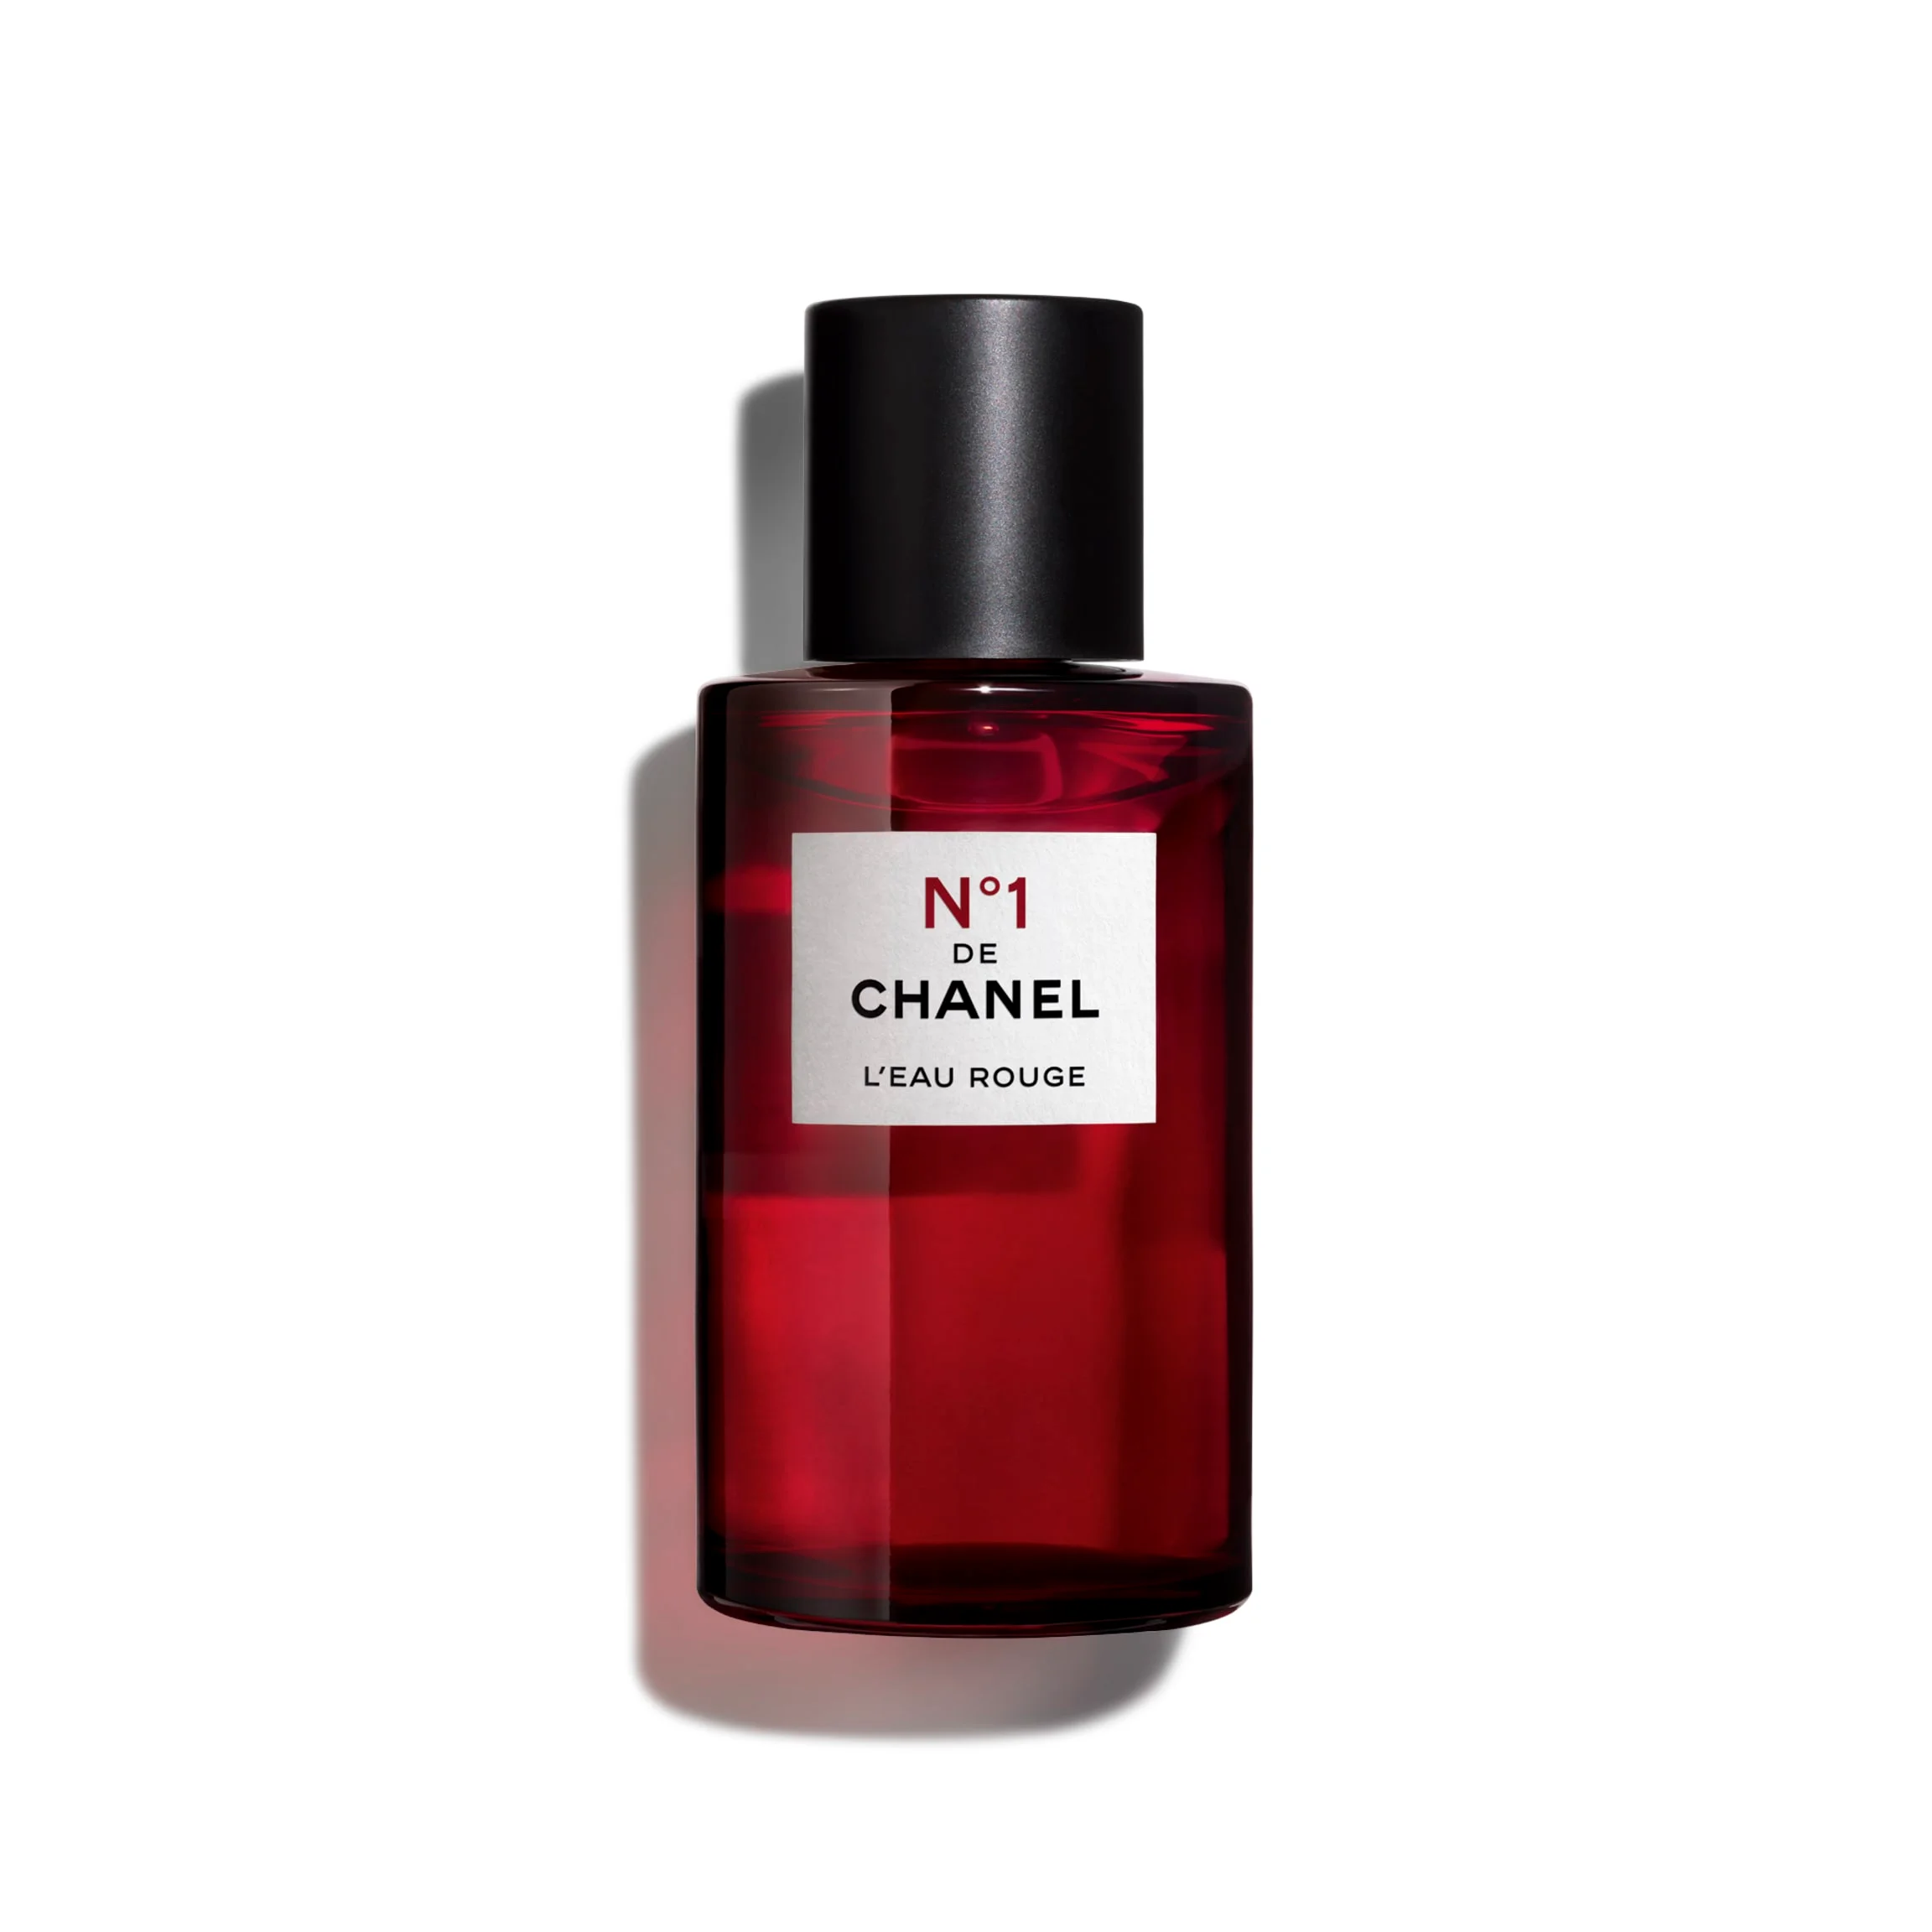 Chanel VERNIS Nail Polish Number 18, Rouge Noir 13 ml : .co